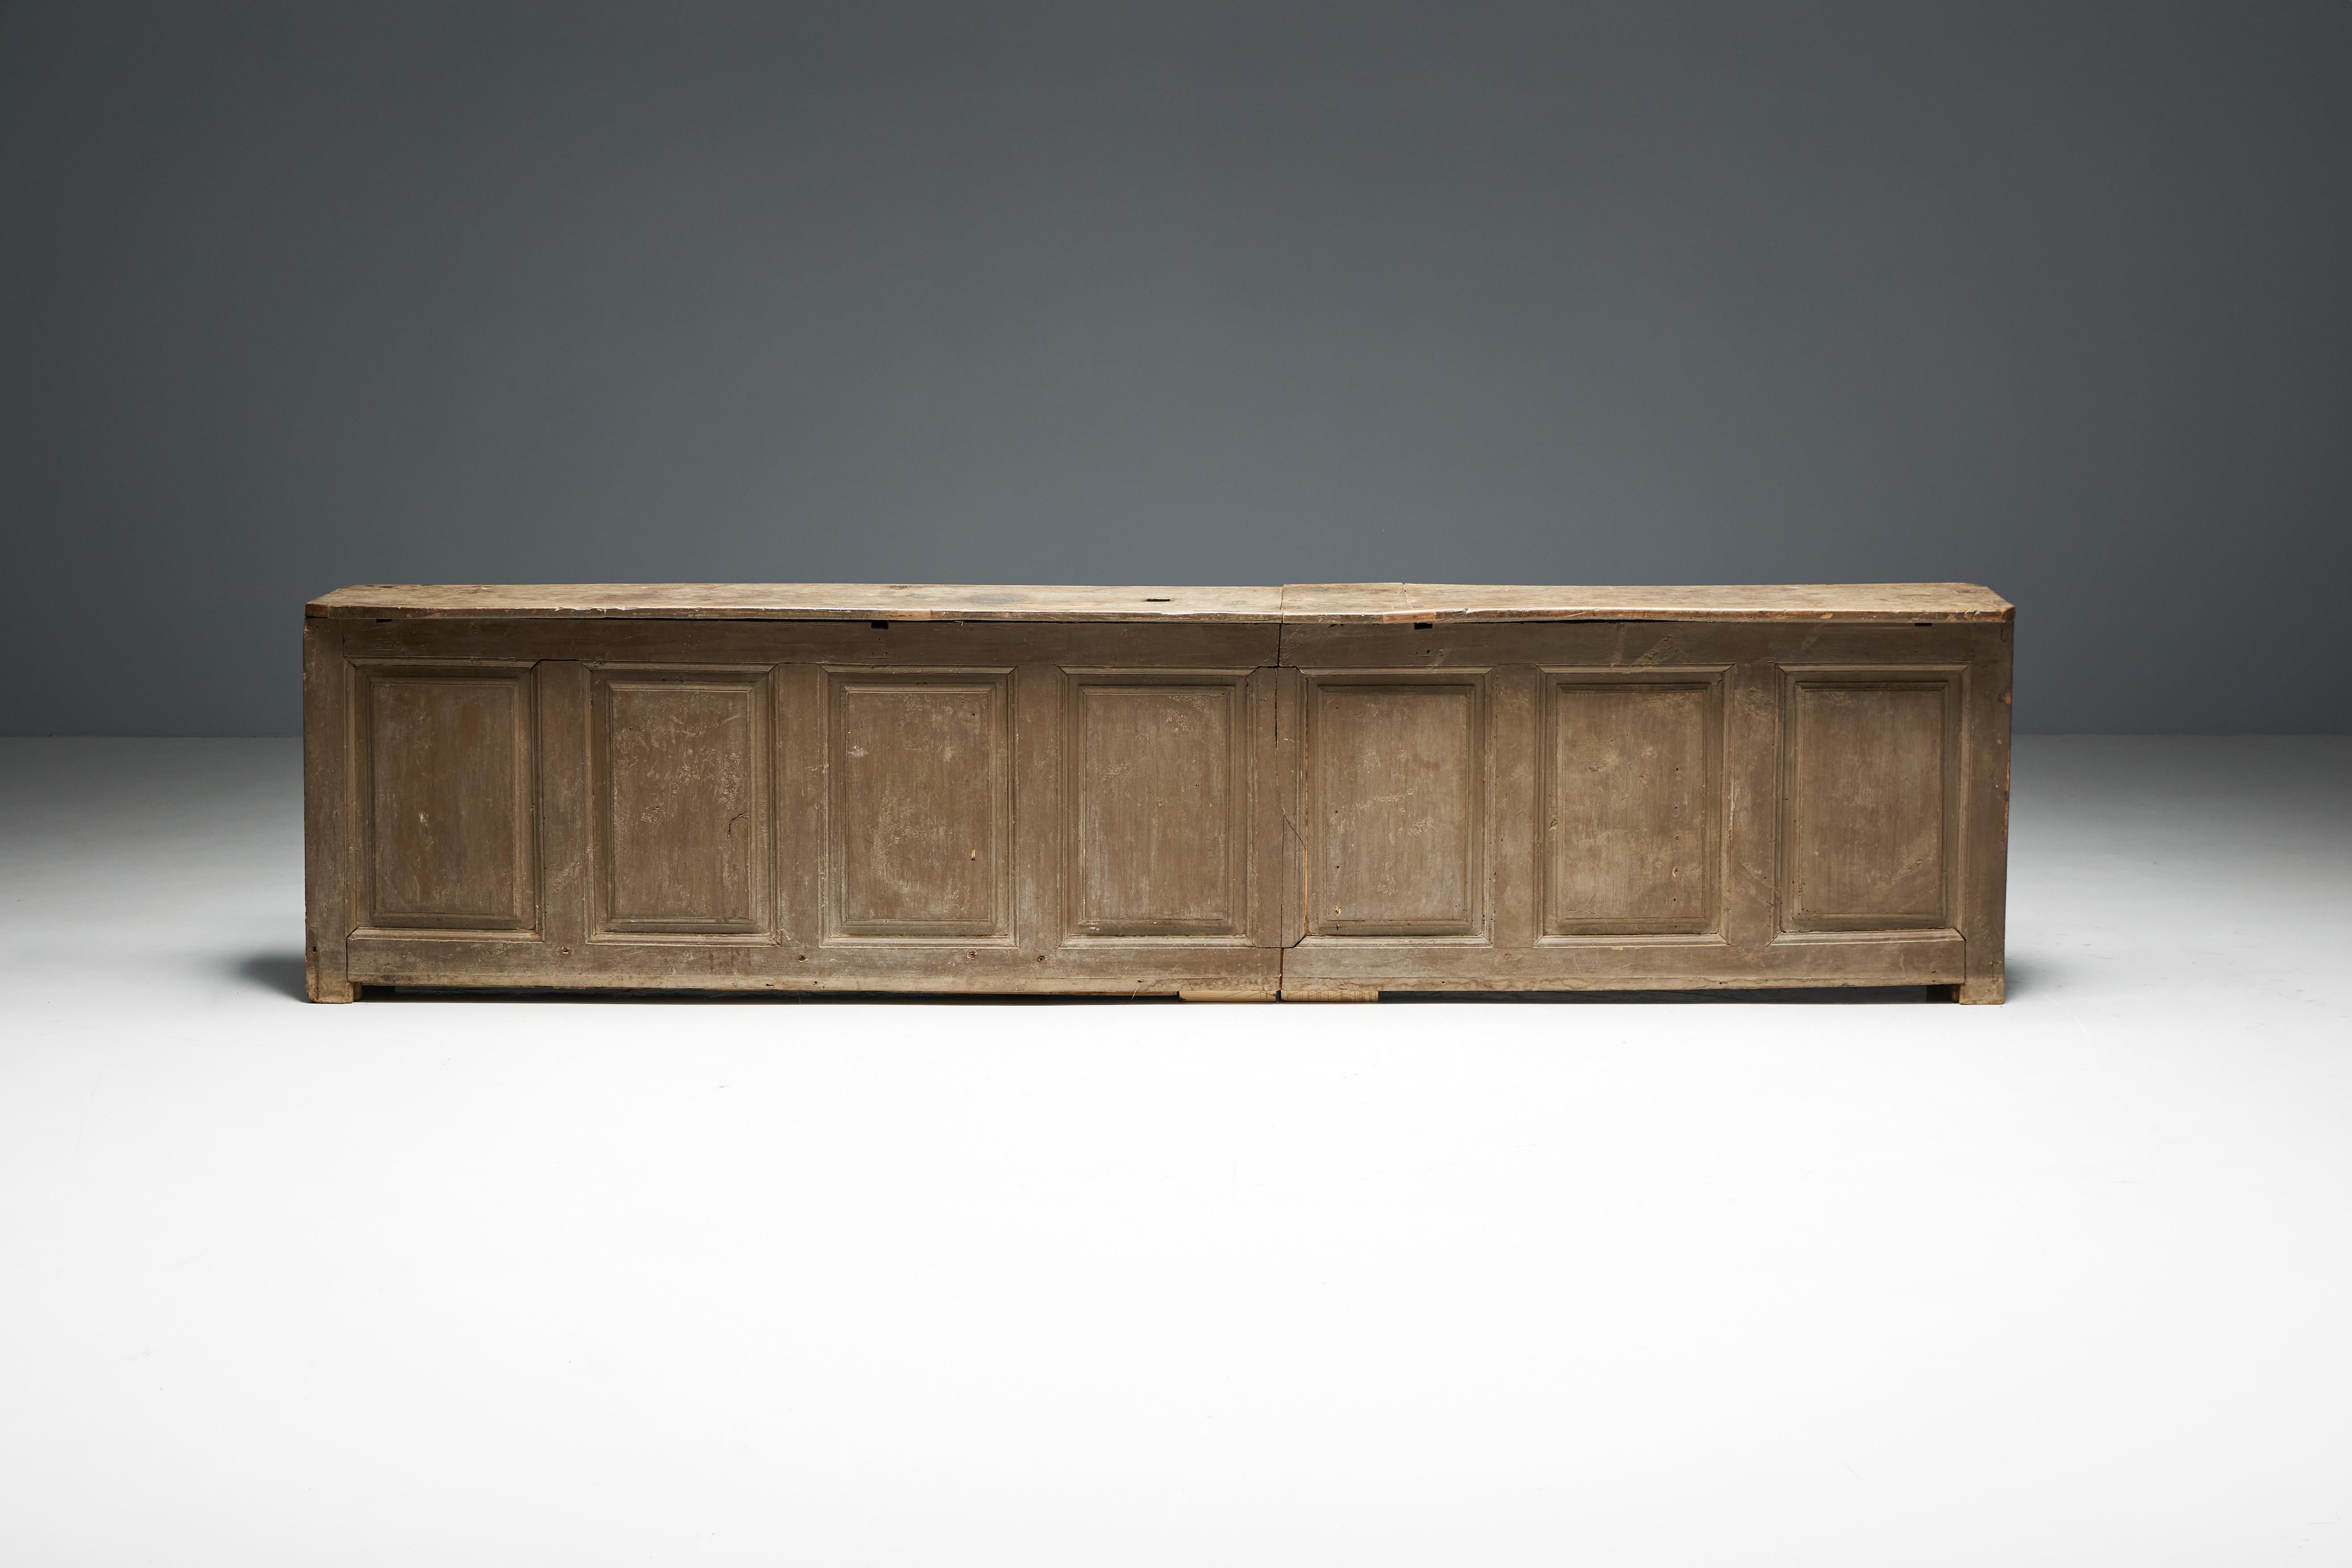 Rustic Art Populaire Freestanding Bar Counter, France, 19th Century 6